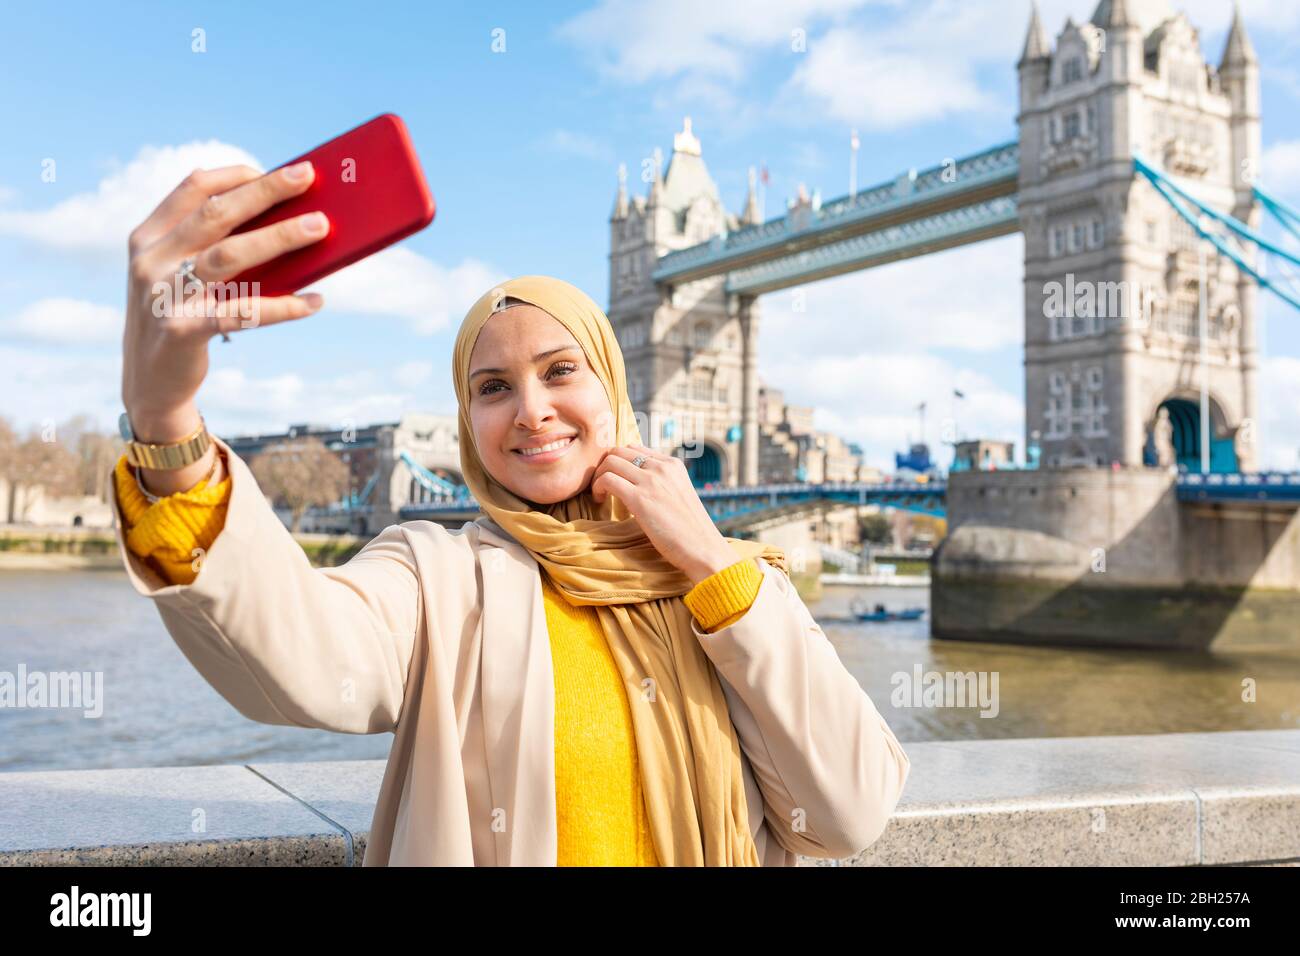 Portrait of smiling young woman taking selfie with smartphone in front of Tower Bridge, London, UK Stock Photo